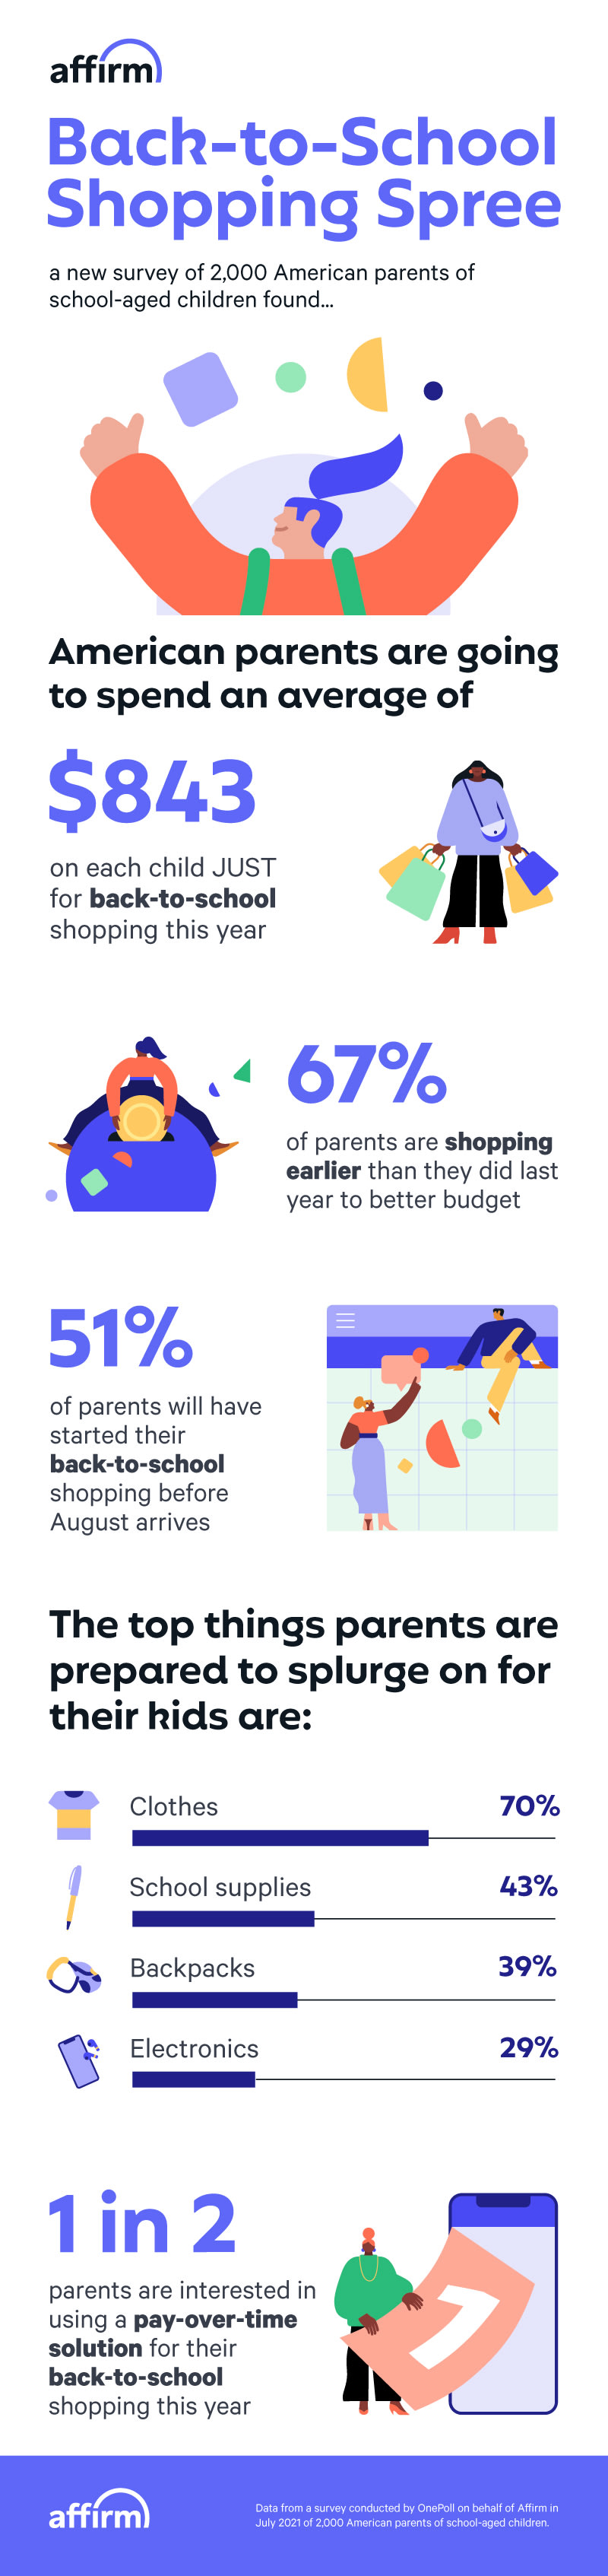 Back-to-School 2021 Infographic